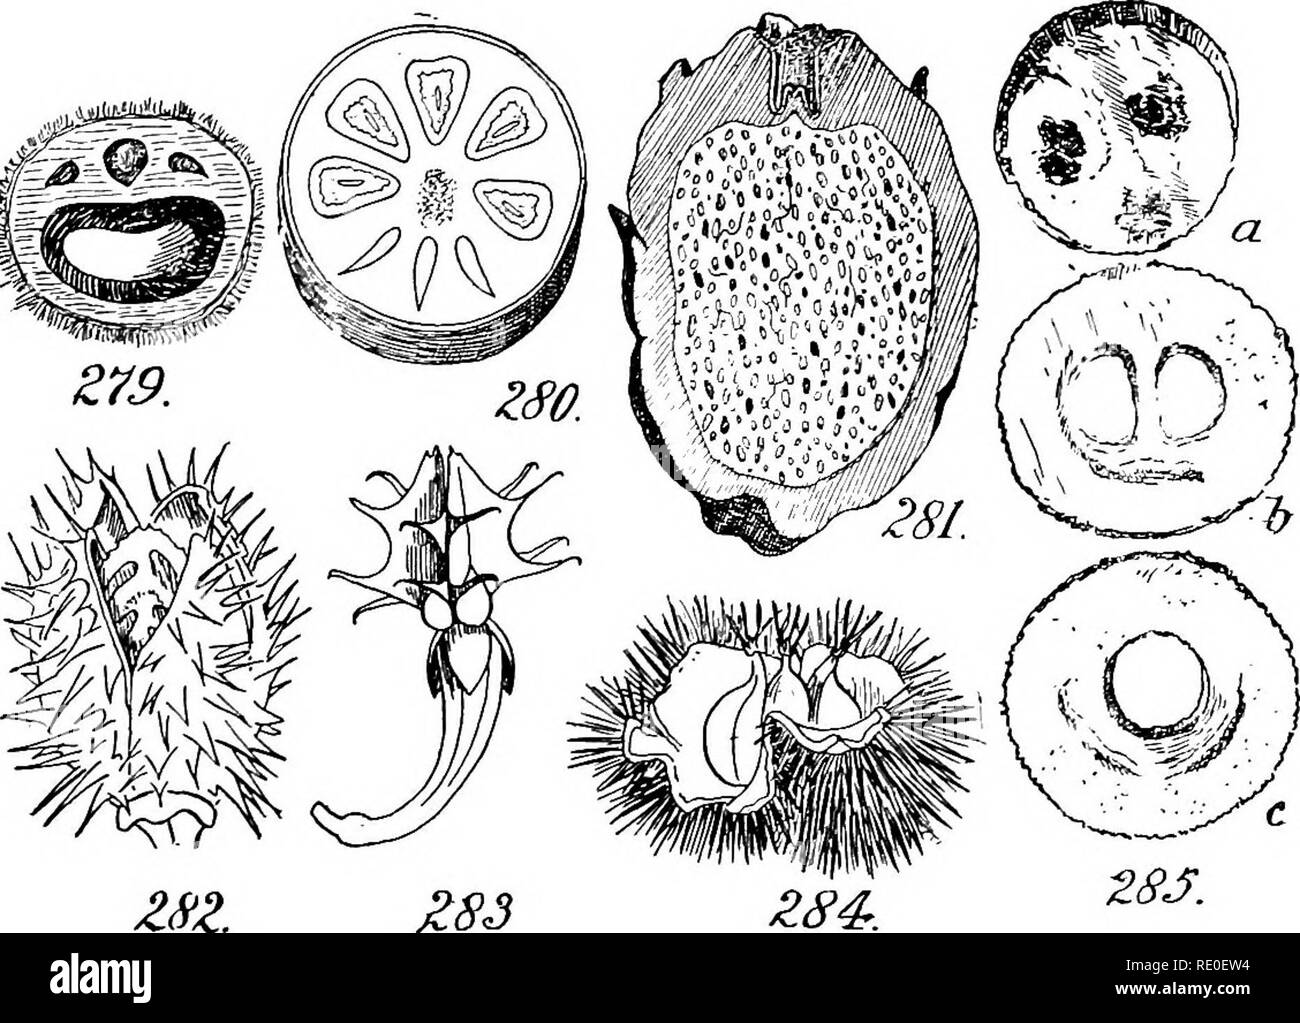 . A manual of structural botany; an introductory textbook for students of science and pharmacy. Plant morphology. TRANSPORTATION OF THE FRUIT 107 in the Labiatae. The newly formed walls are not always vertical. The fruit of Aeschynomene (Fig. 351) and that of Sophora (Fig. 352) divide transversely into one-seeded joints. Special Defensive Provisions.—Concerning the protection of the fruit and seeds, we note that its full accomplishment often calls for other defensive provisions than those against merely mechanical forces, in the form of appendages constituting an armor. These are sometimes an  Stock Photo